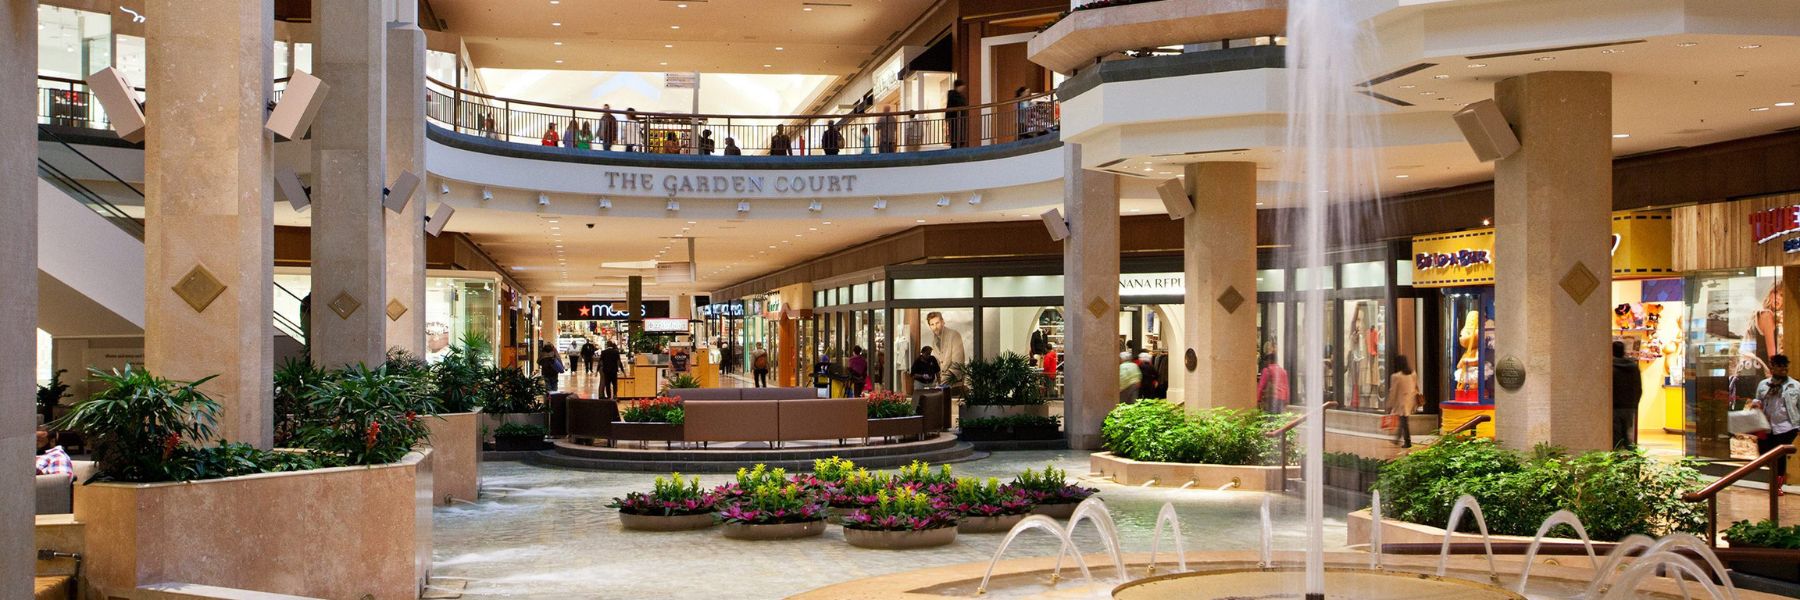 Saint Louis Galleria is one of the best shopping centers in the region.